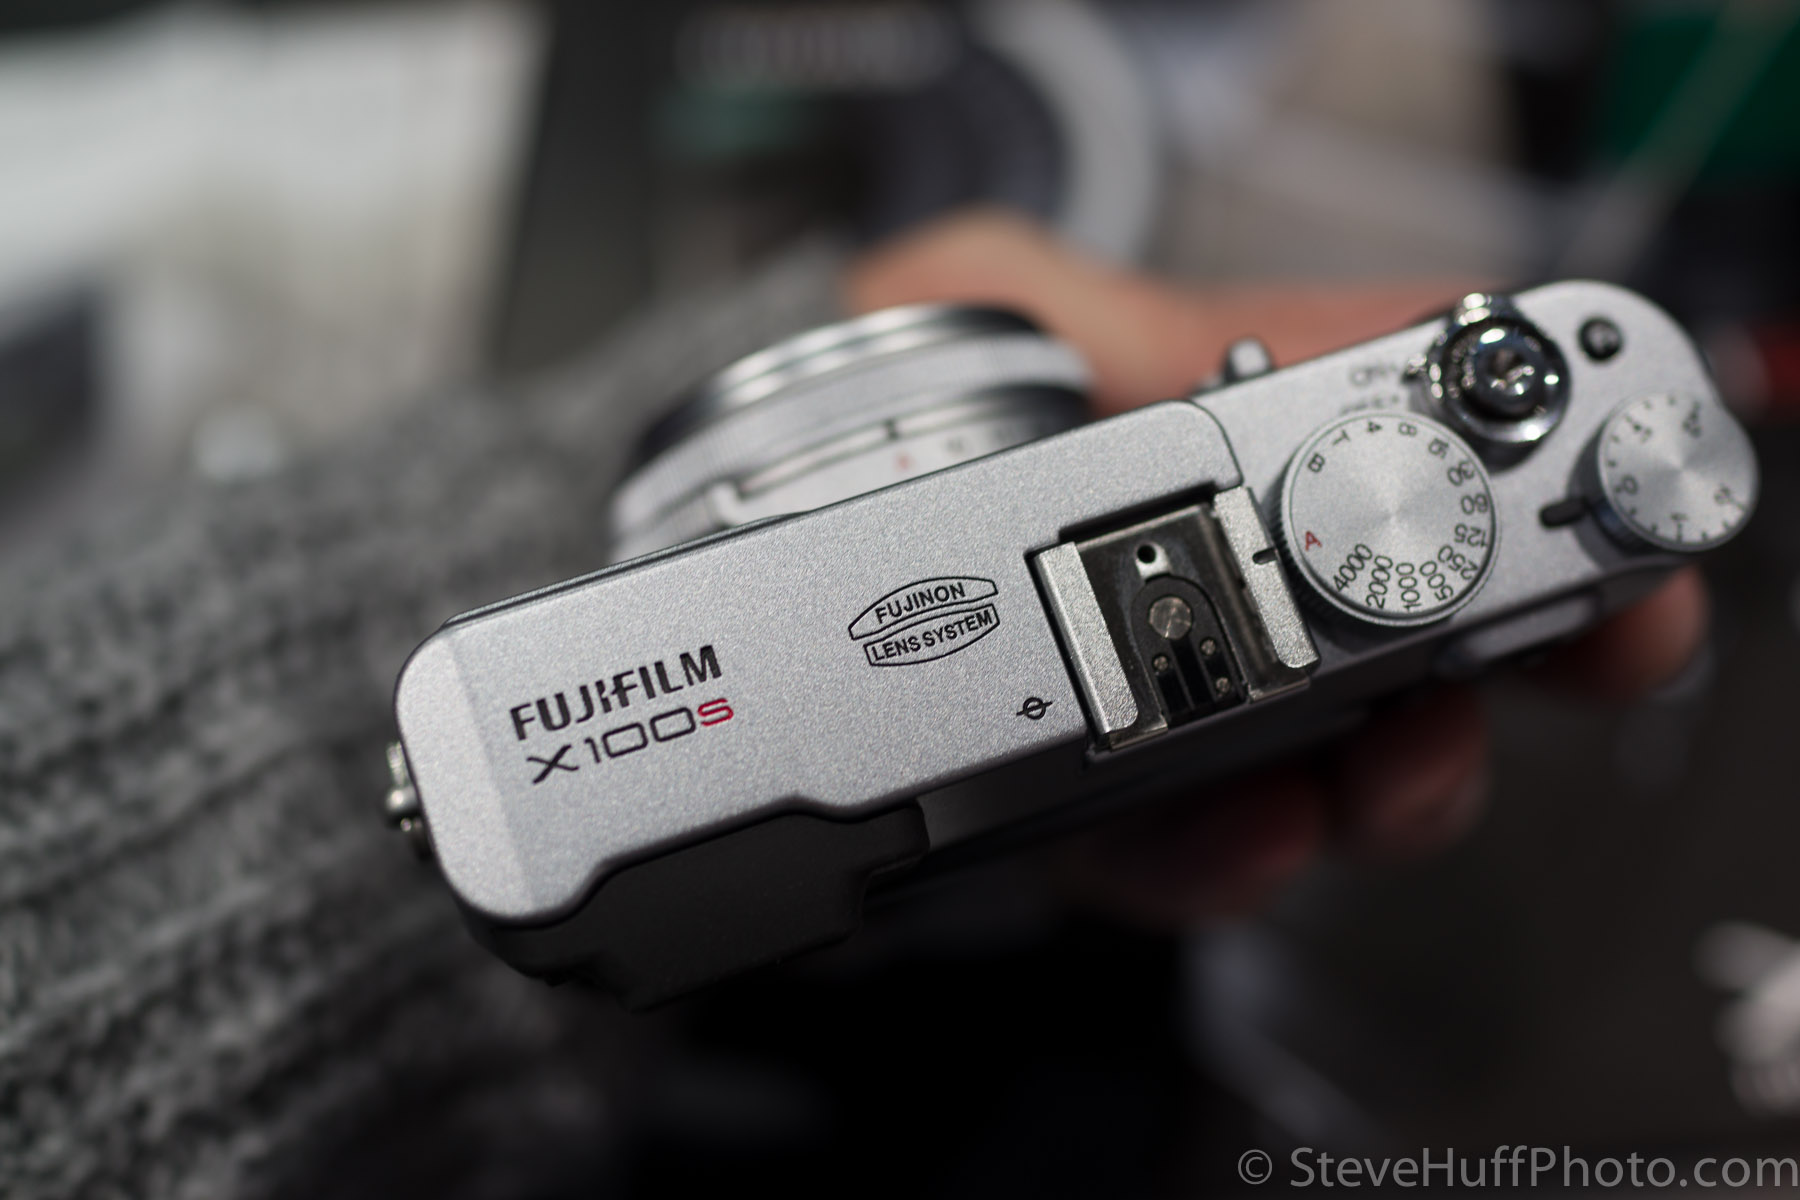 The Fuji X100 Digital Camera Real World Review by Steve Huff